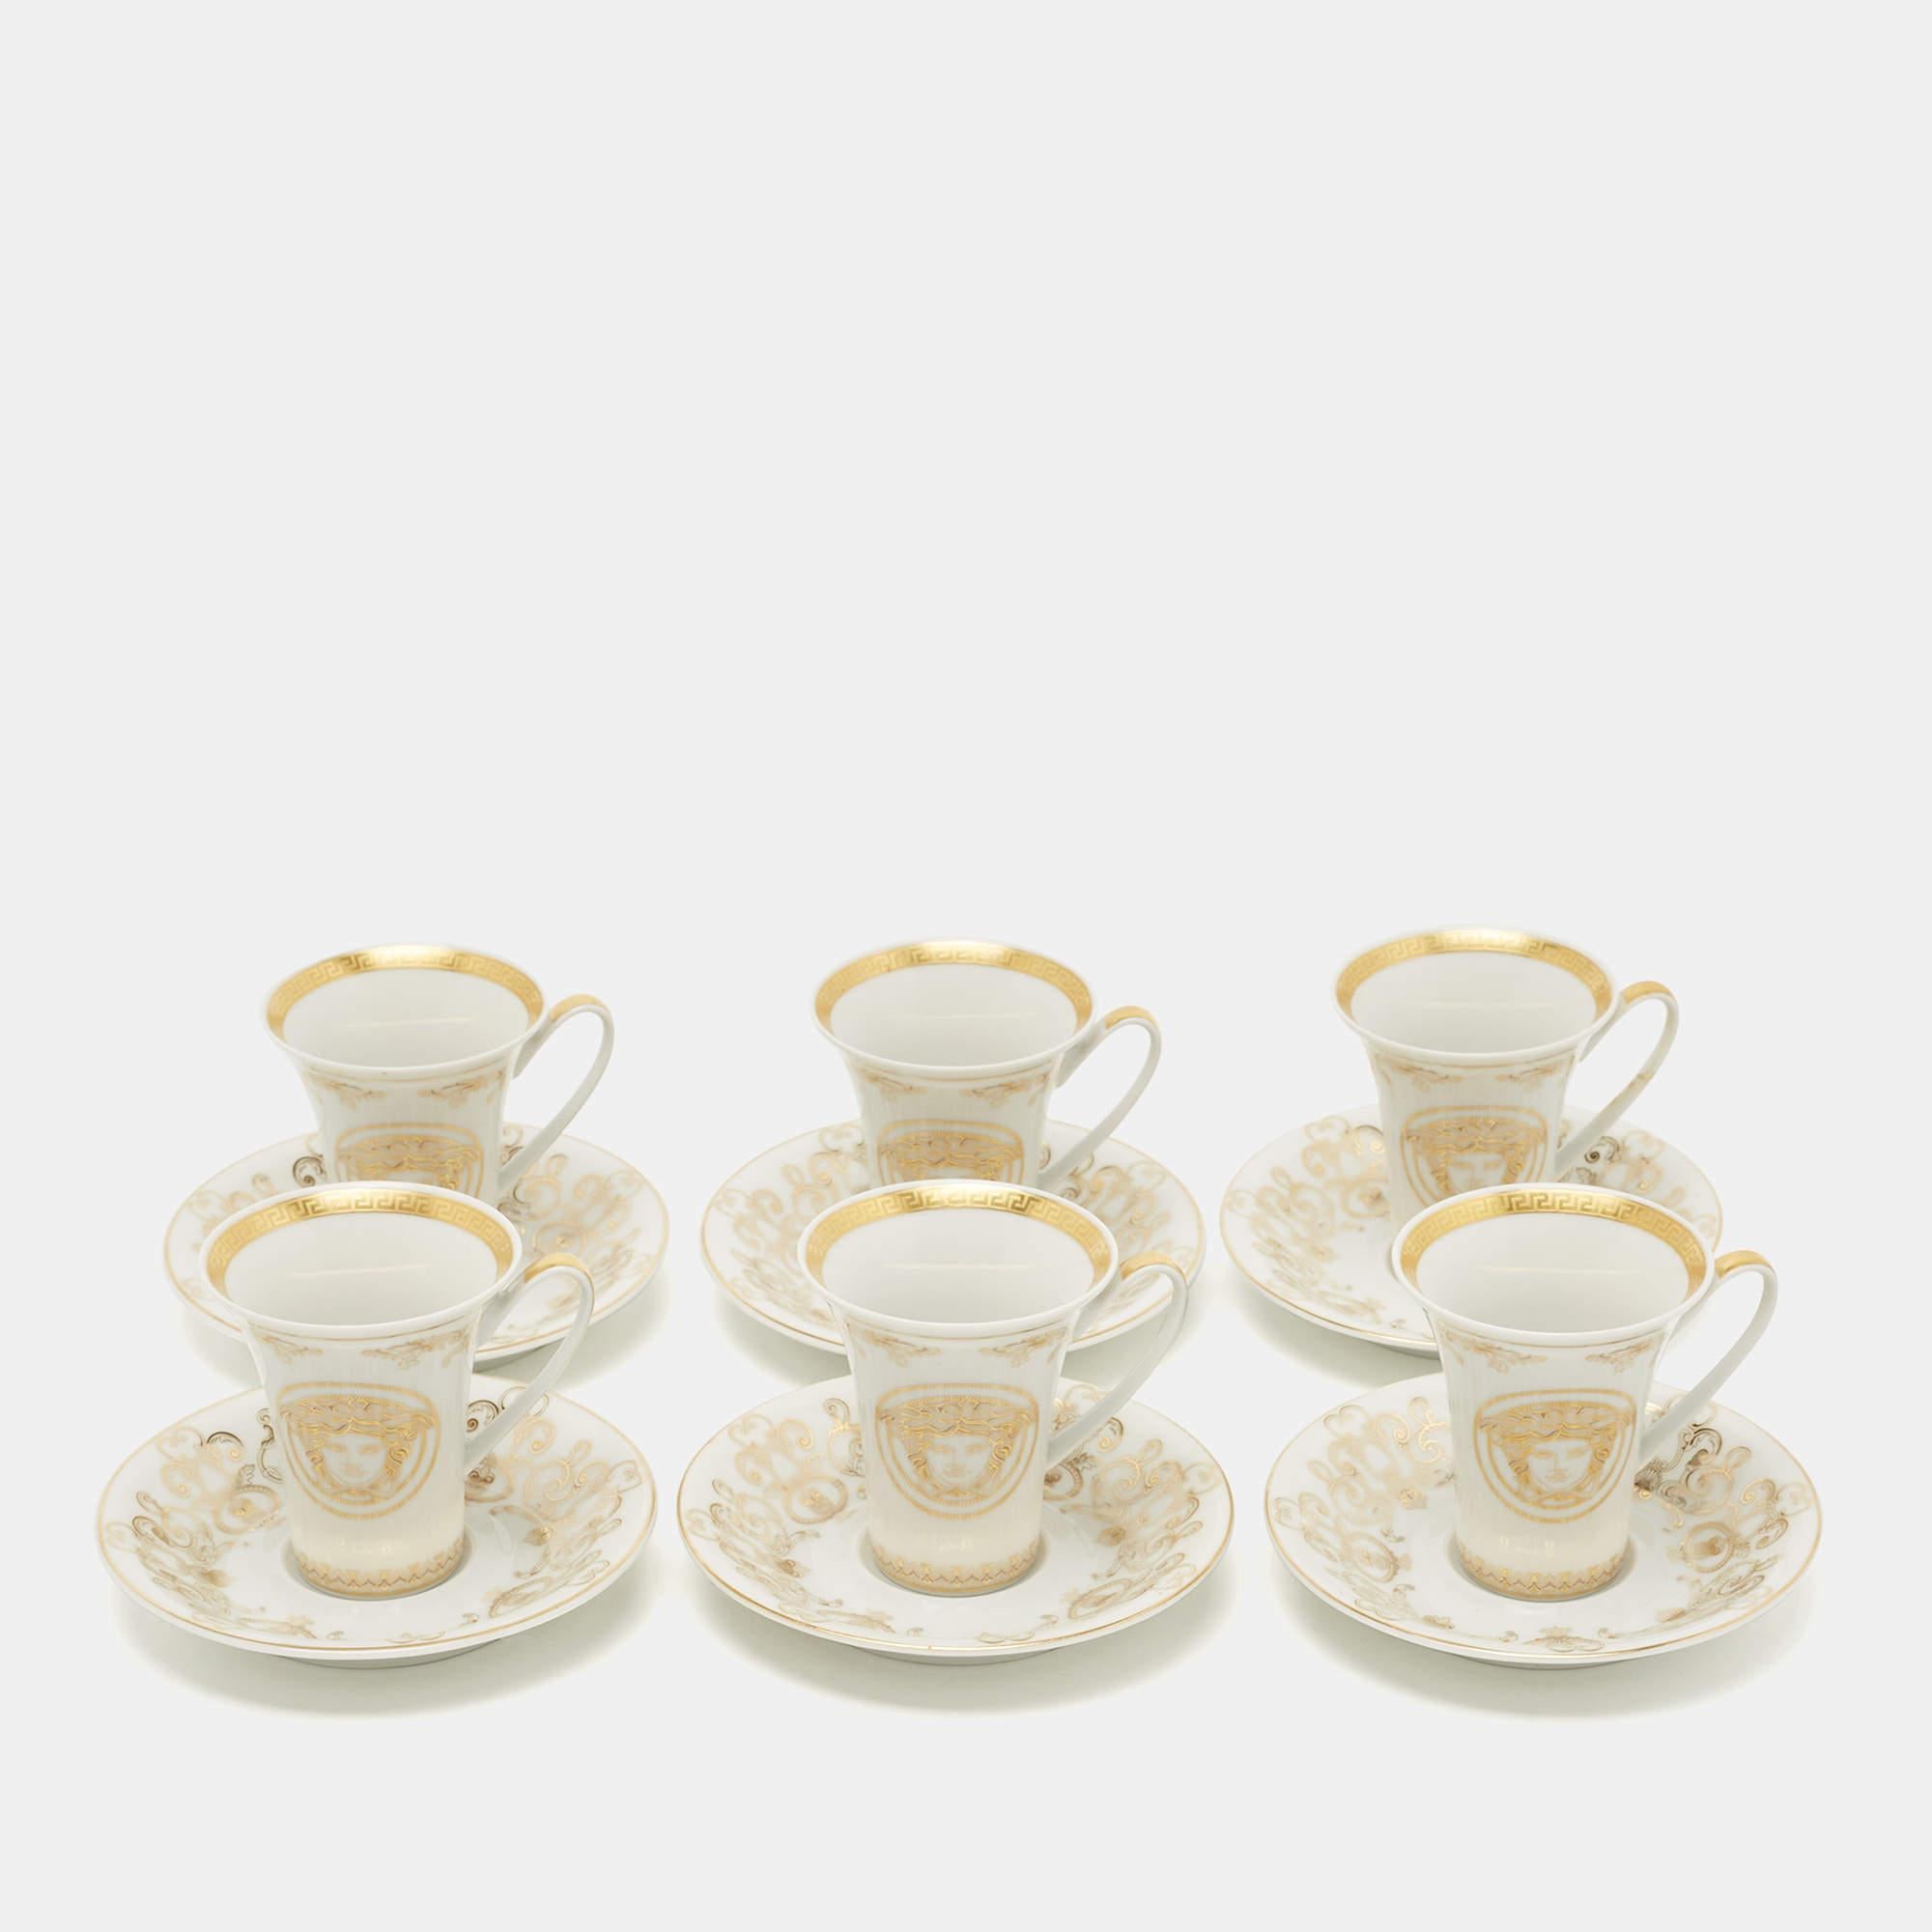 Rosenthal Meets Versace Gold/White Medusa Gala Espresso Cup and Saucer Set Of 6 In Excellent Condition In Dubai, Al Qouz 2